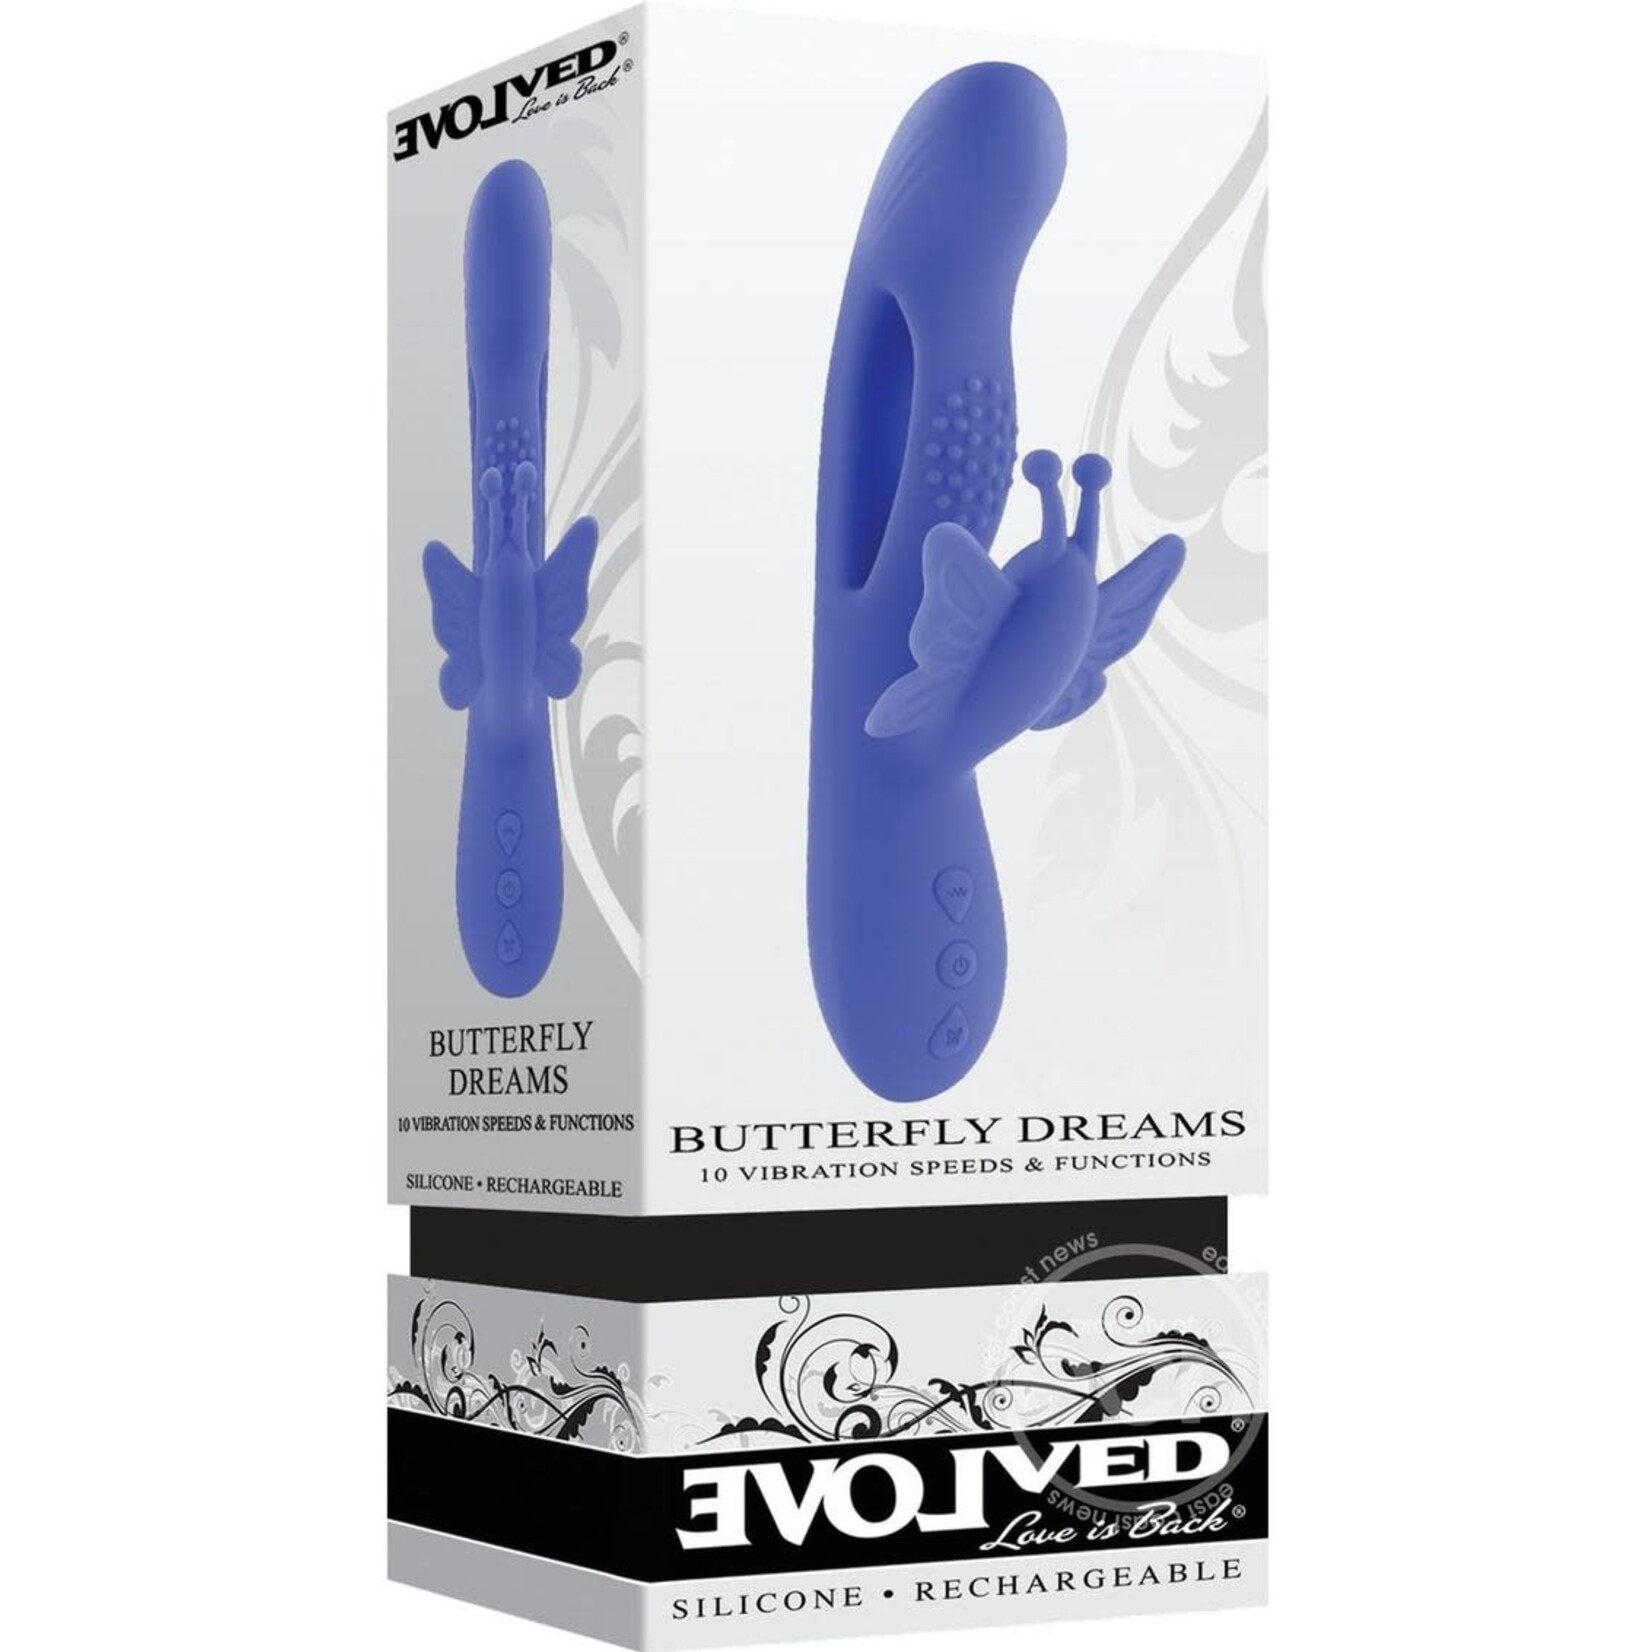 Butterfly Dreams Rechargeable Silicone Dual Stimulating Vibrator - Blue